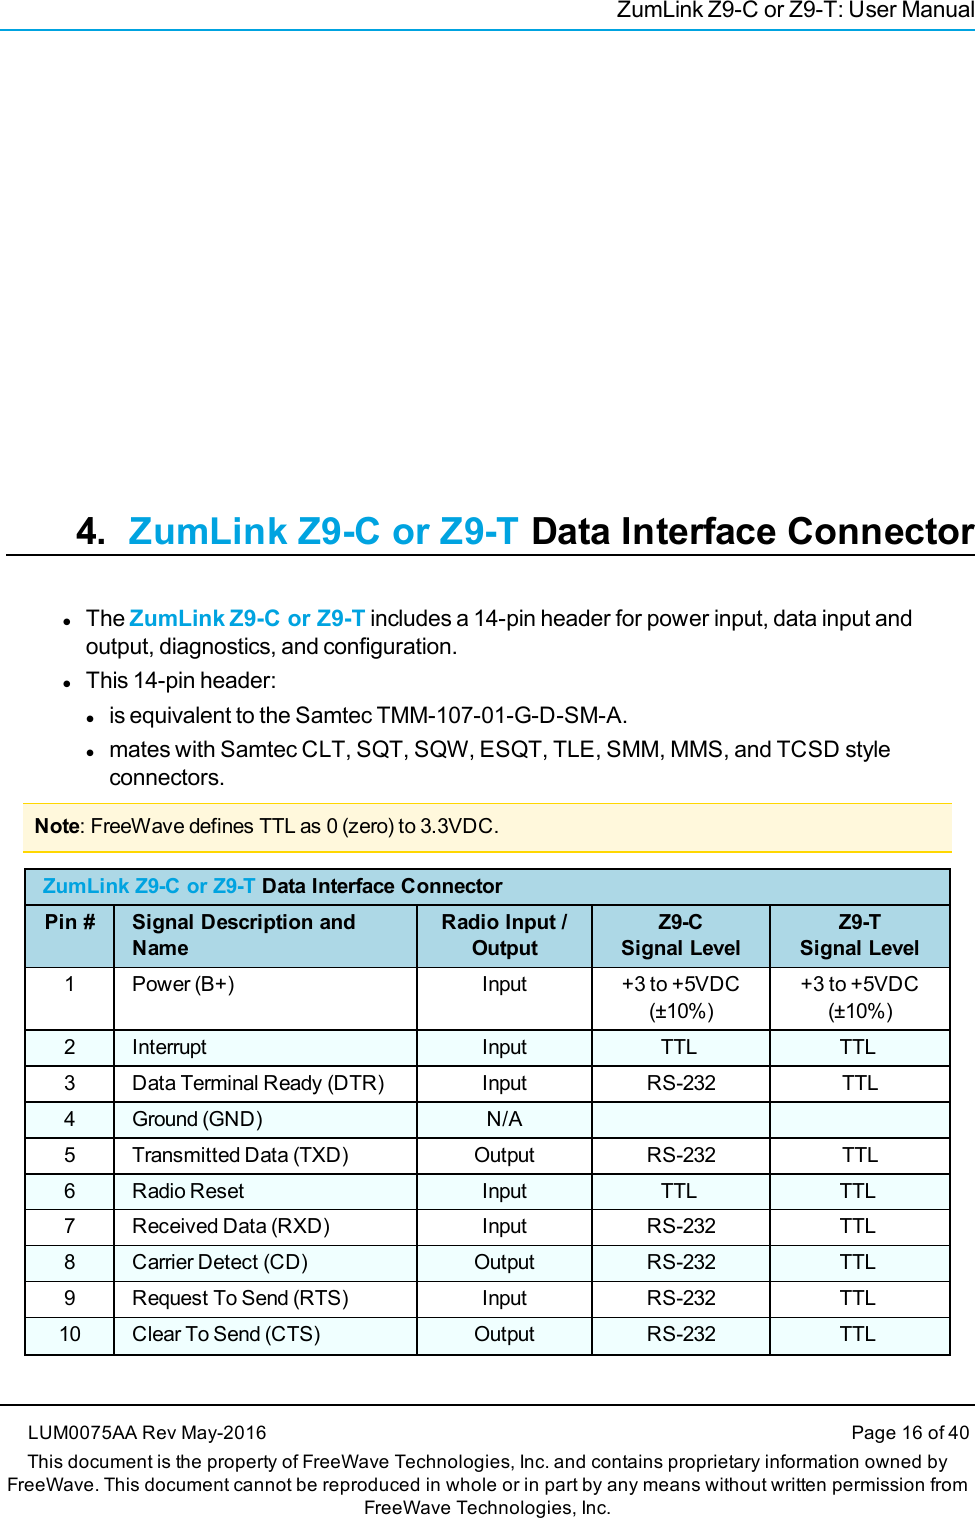 ZumLink Z9-C or Z9-T: User Manual4. ZumLink Z9-C or Z9-T Data Interface ConnectorlThe ZumLink Z9-C or Z9-T includes a 14-pin header for power input, data input andoutput, diagnostics, and configuration.lThis 14-pin header:lis equivalent to the Samtec TMM-107-01-G-D-SM-A.lmates with Samtec CLT, SQT, SQW, ESQT, TLE, SMM, MMS, and TCSD styleconnectors.Note: FreeWave defines TTL as 0 (zero) to 3.3VDC.ZumLink Z9-C or Z9-T Data Interface ConnectorPin # Signal Description andNameRadio Input /OutputZ9-CSignal LevelZ9-TSignal Level1 Power (B+) Input +3 to +5VDC(±10%)+3 to +5VDC(±10%)2 Interrupt Input TTL TTL3 Data Terminal Ready (DTR) Input RS-232 TTL4 Ground (GND) N/A5 Transmitted Data (TXD) Output RS-232 TTL6 Radio Reset Input TTL TTL7 Received Data (RXD) Input RS-232 TTL8 Carrier Detect (CD) Output RS-232 TTL9 Request To Send (RTS) Input RS-232 TTL10 Clear To Send (CTS) Output RS-232 TTLLUM0075AA Rev May-2016 Page 16 of 40This document is the property of FreeWave Technologies, Inc. and contains proprietary information owned byFreeWave. This document cannot be reproduced in whole or in part by any means without written permission fromFreeWave Technologies, Inc.